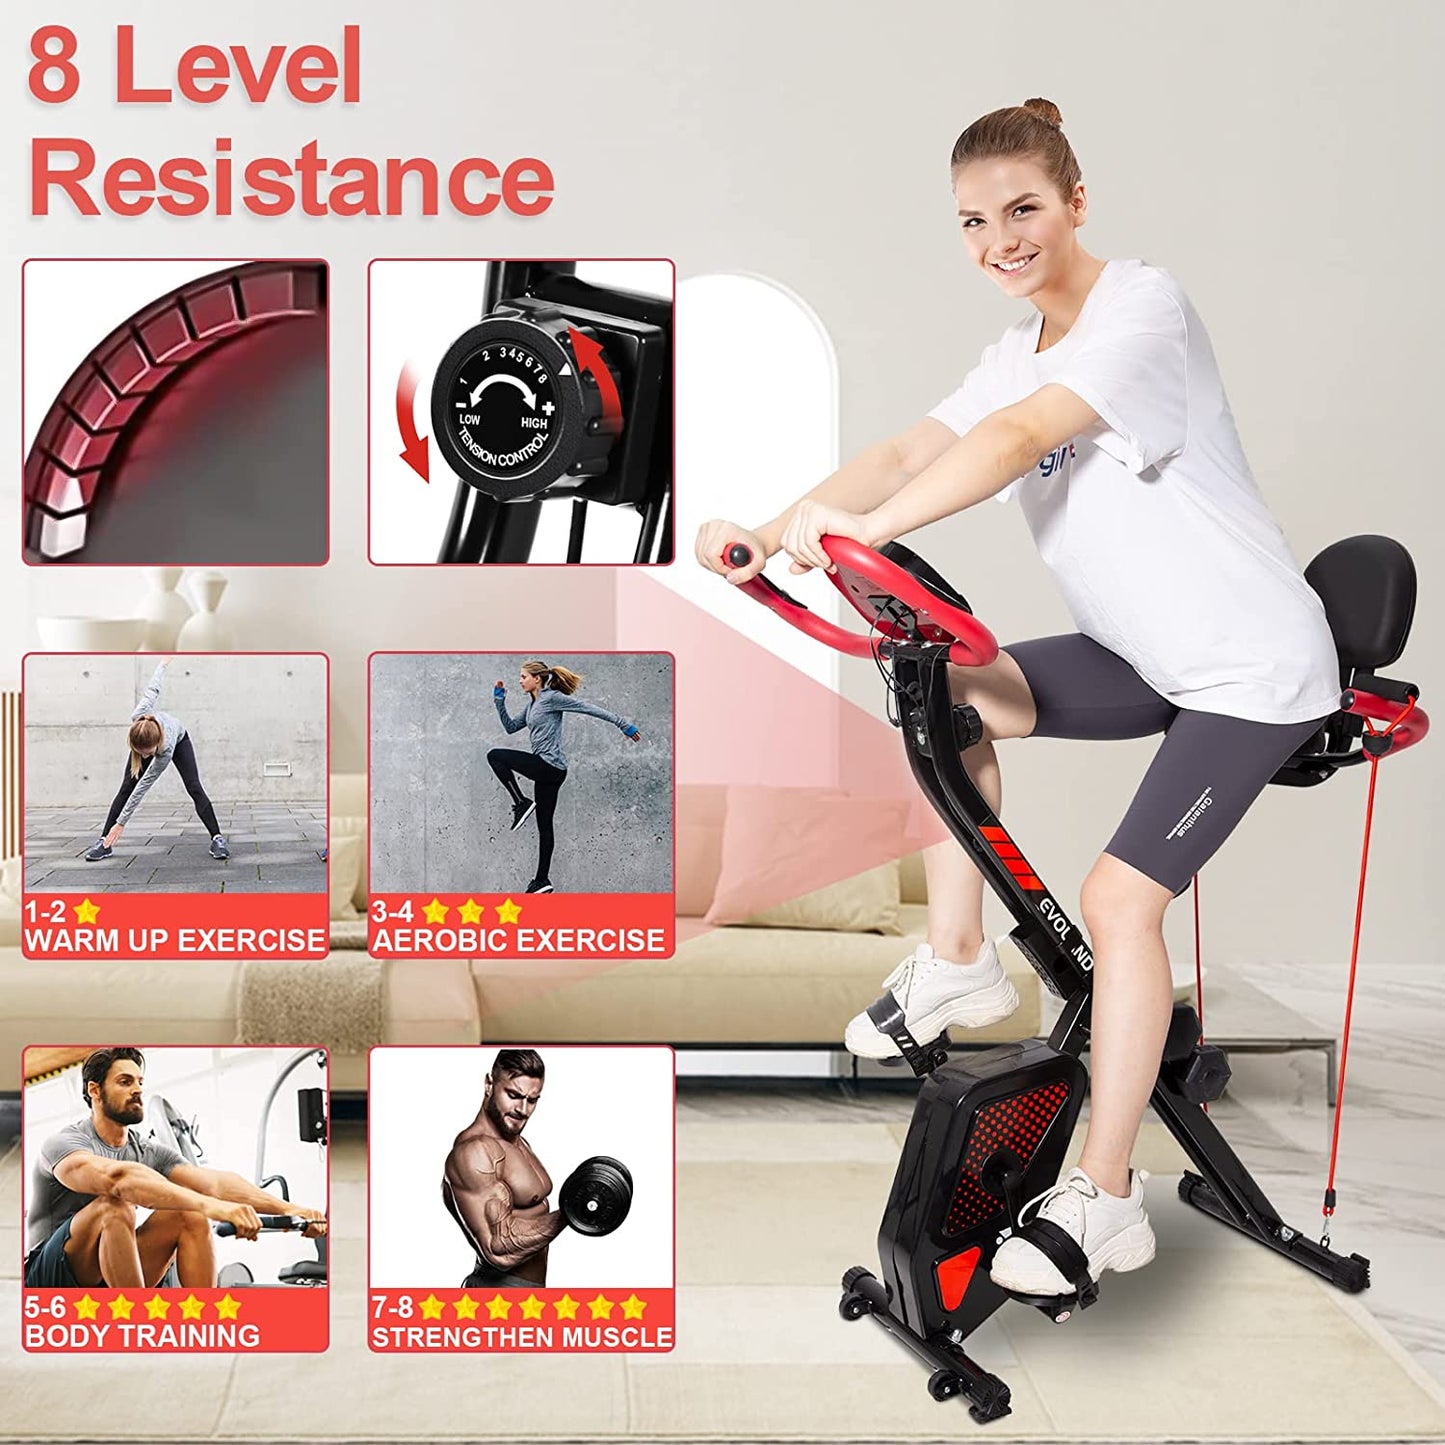 Exercise Bike with 8-Level Adjustable Resistance, Foldable Indoor Trainer Fitness Bike, with Pulse Rate Sensor| LCD Monitor| 2X 1Kg Dumbbells, 265LBS Max Load for Home Use Workout Bike